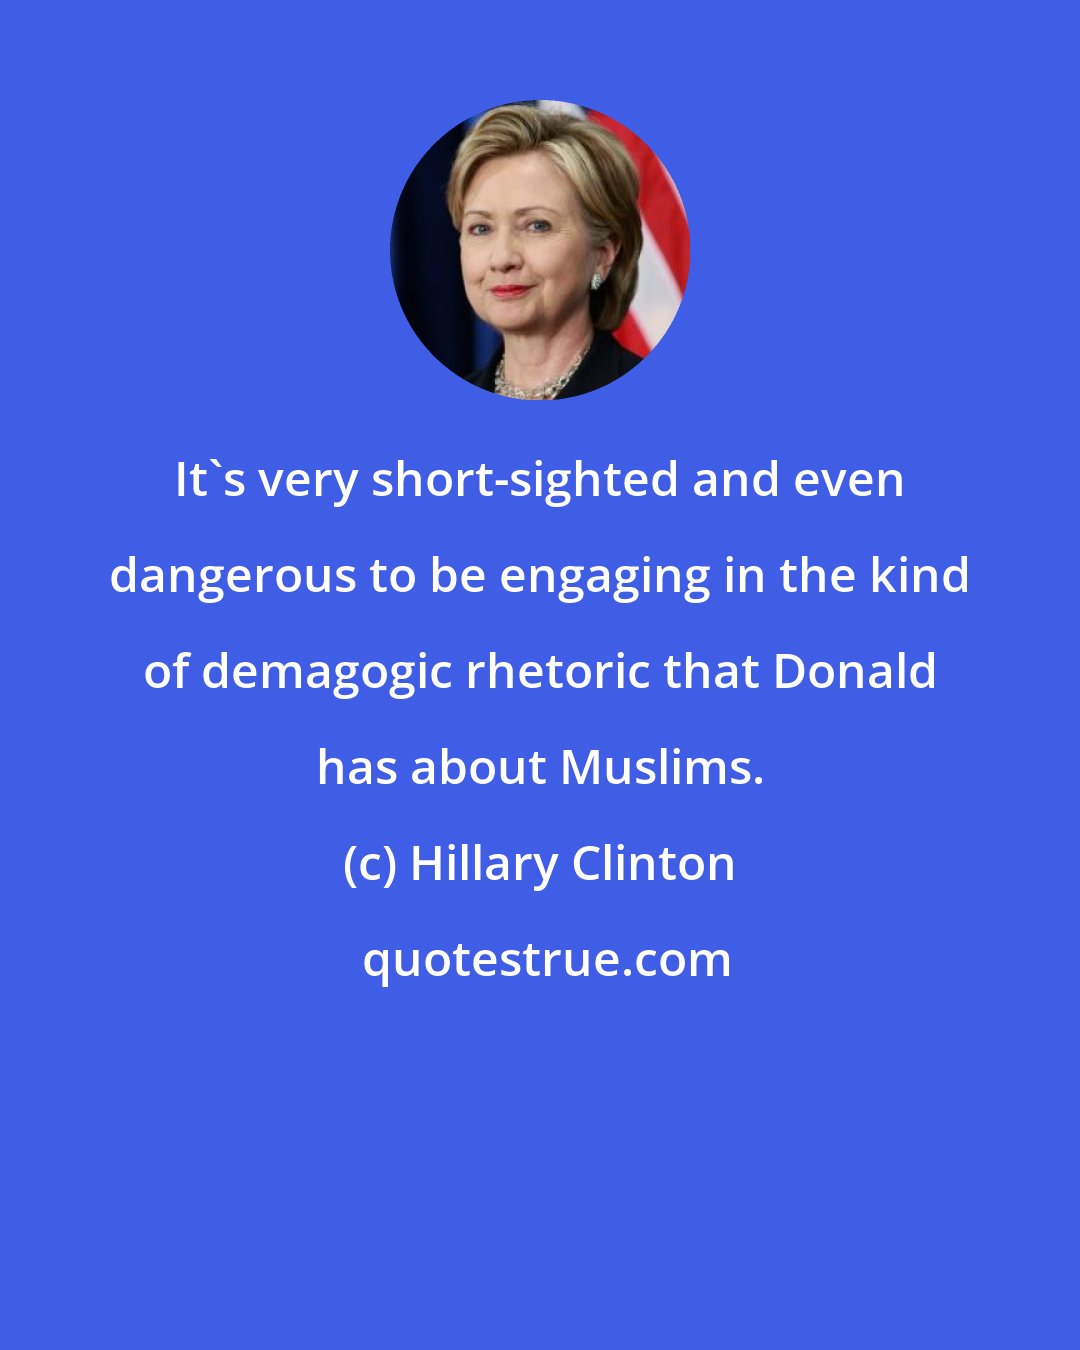 Hillary Clinton: It's very short-sighted and even dangerous to be engaging in the kind of demagogic rhetoric that Donald has about Muslims.